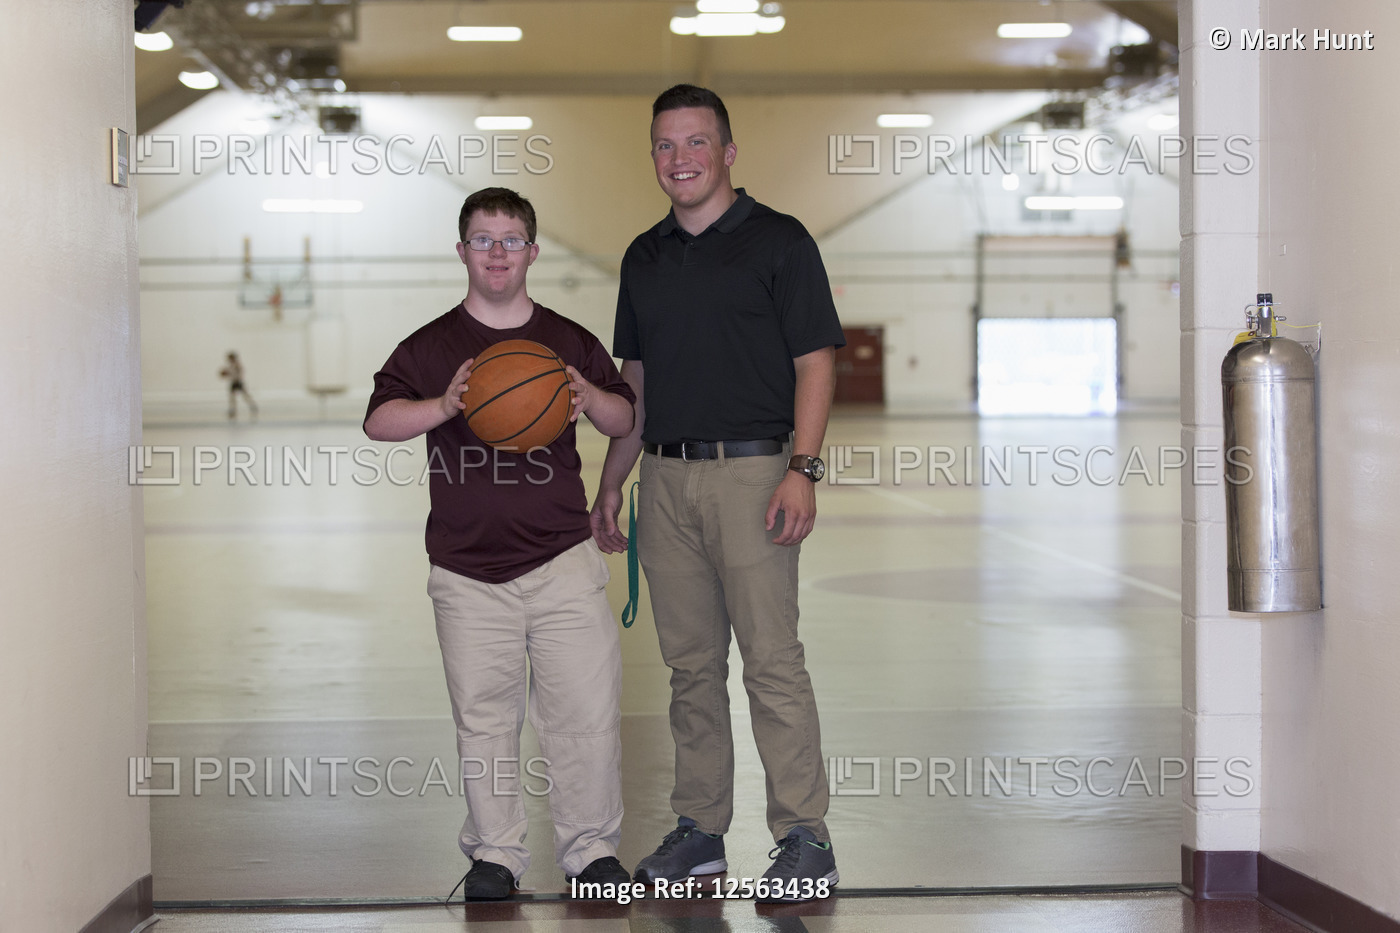 Young man with Down Syndrome playing basketball in school gym with his friend